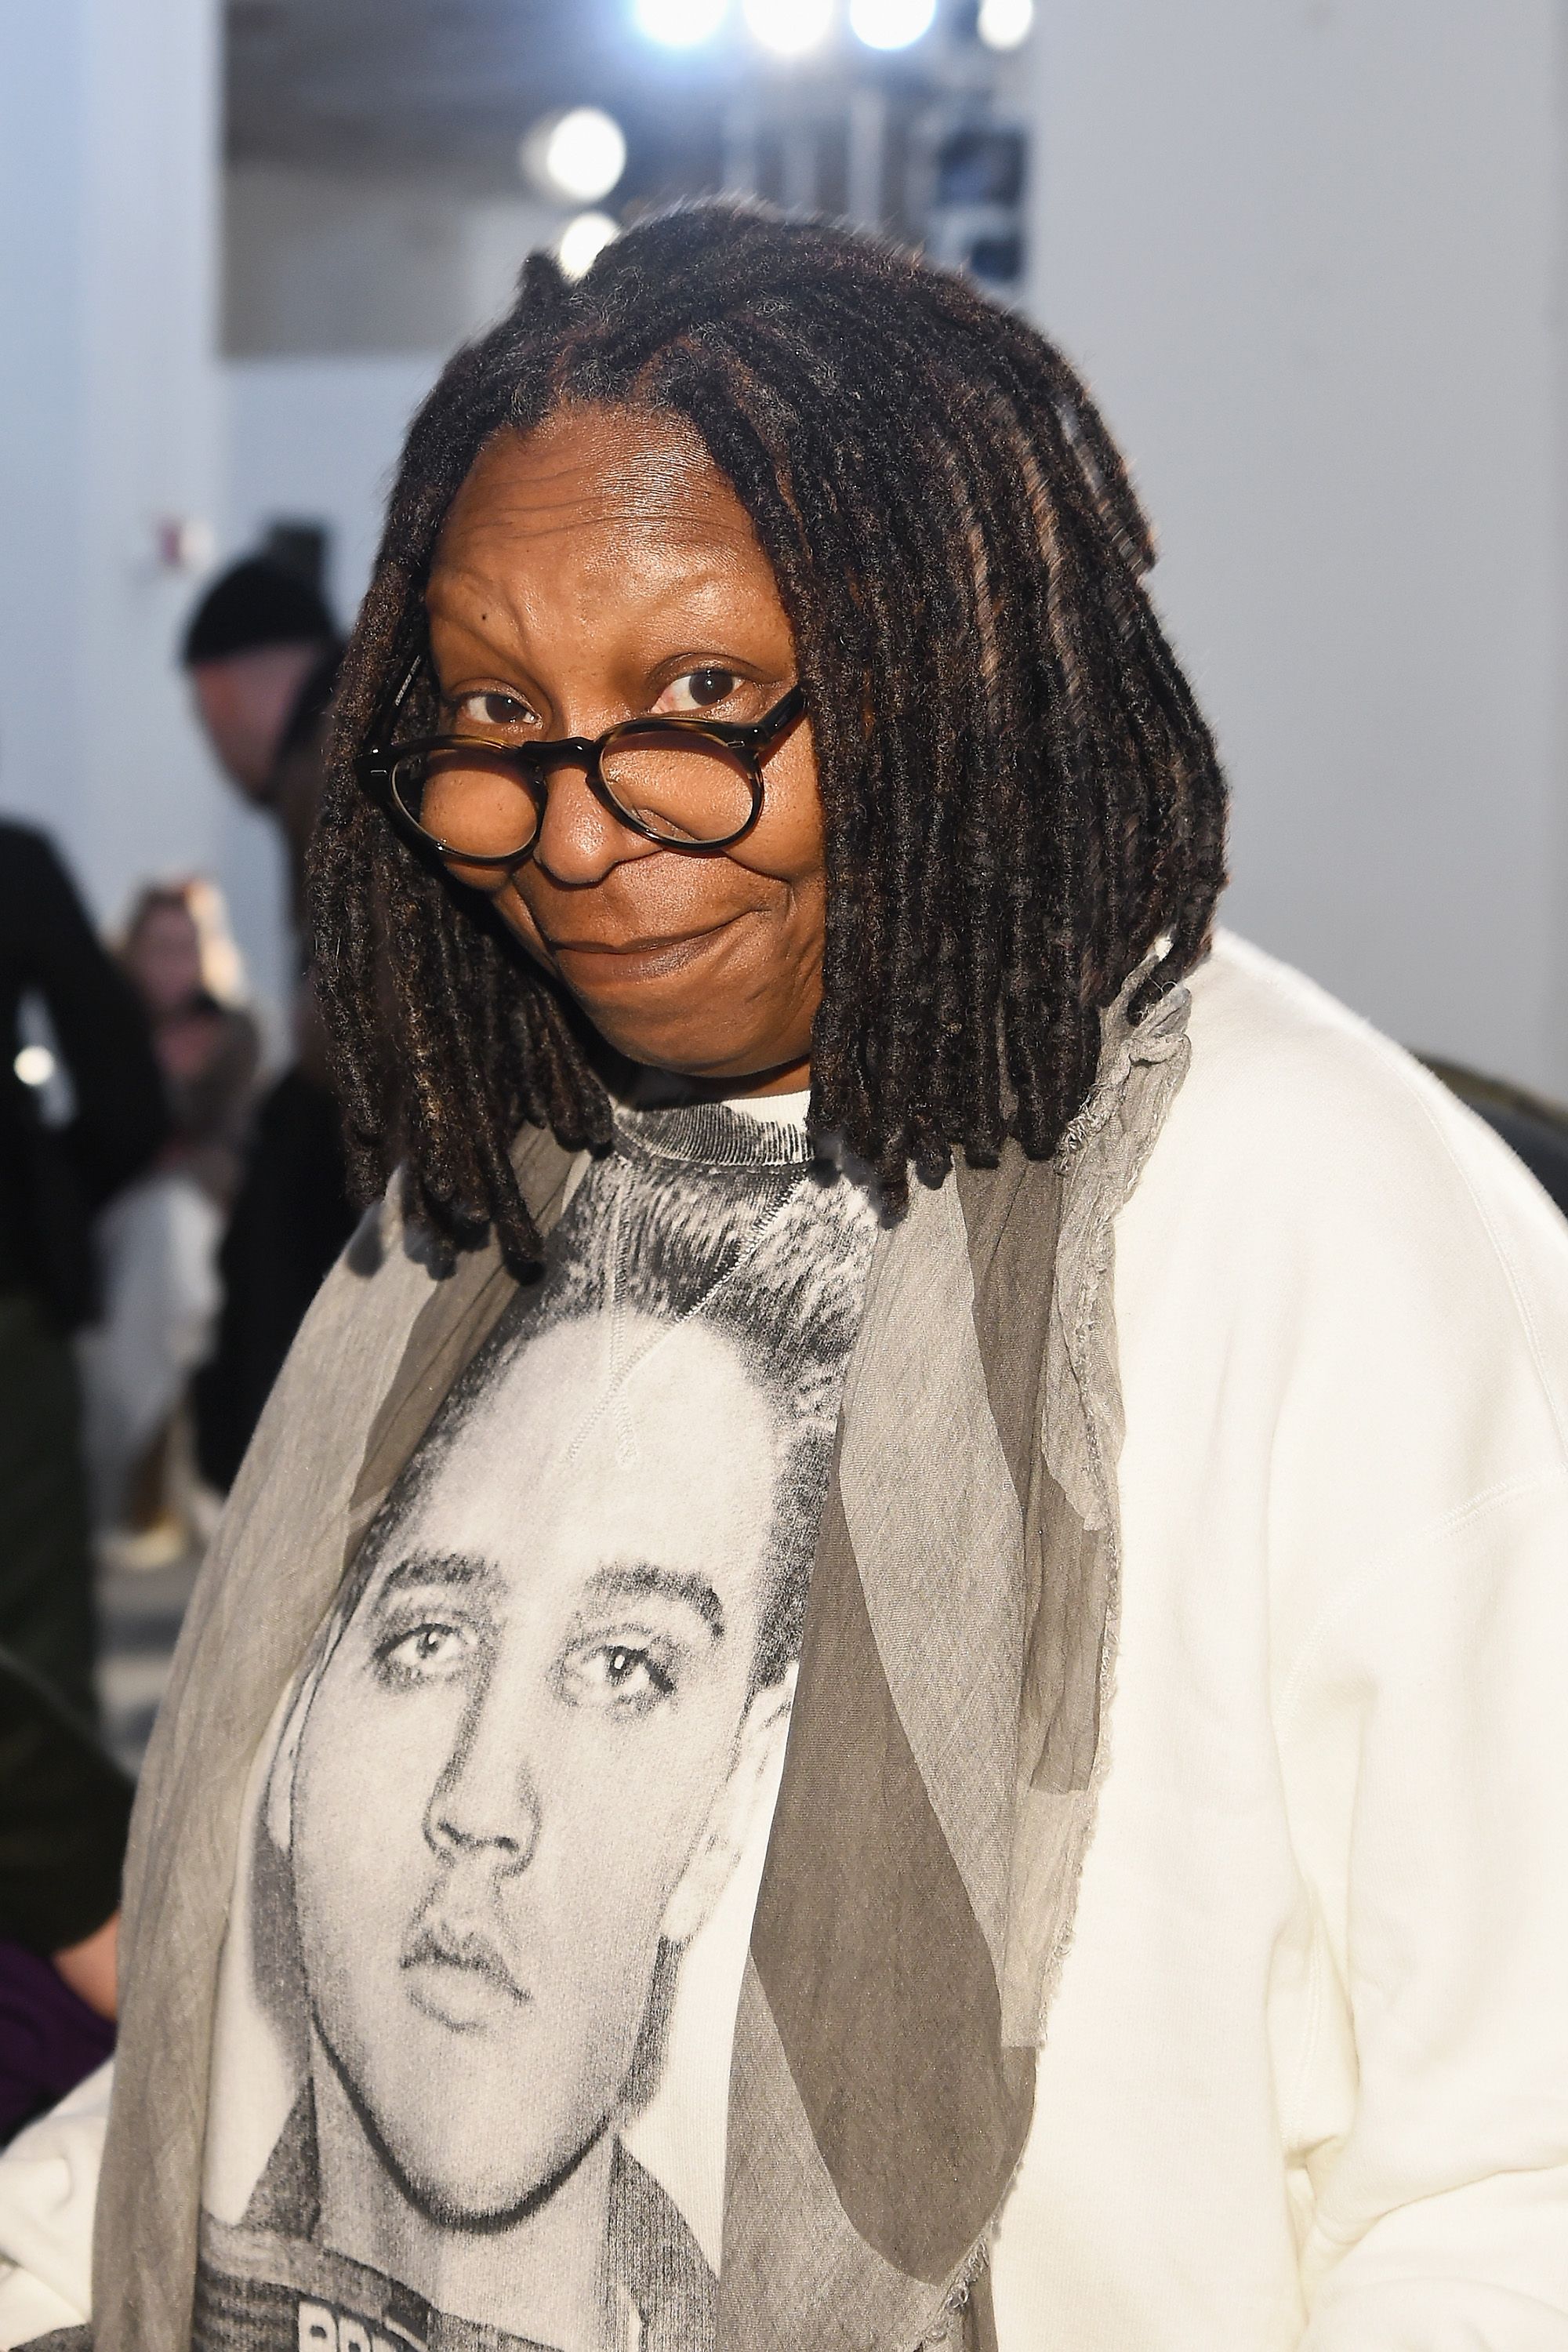 Whoopi Goldberg at the R13 fashion show during New York Fashion Week on February 10, 2018 in New York City. | Source: Getty Images